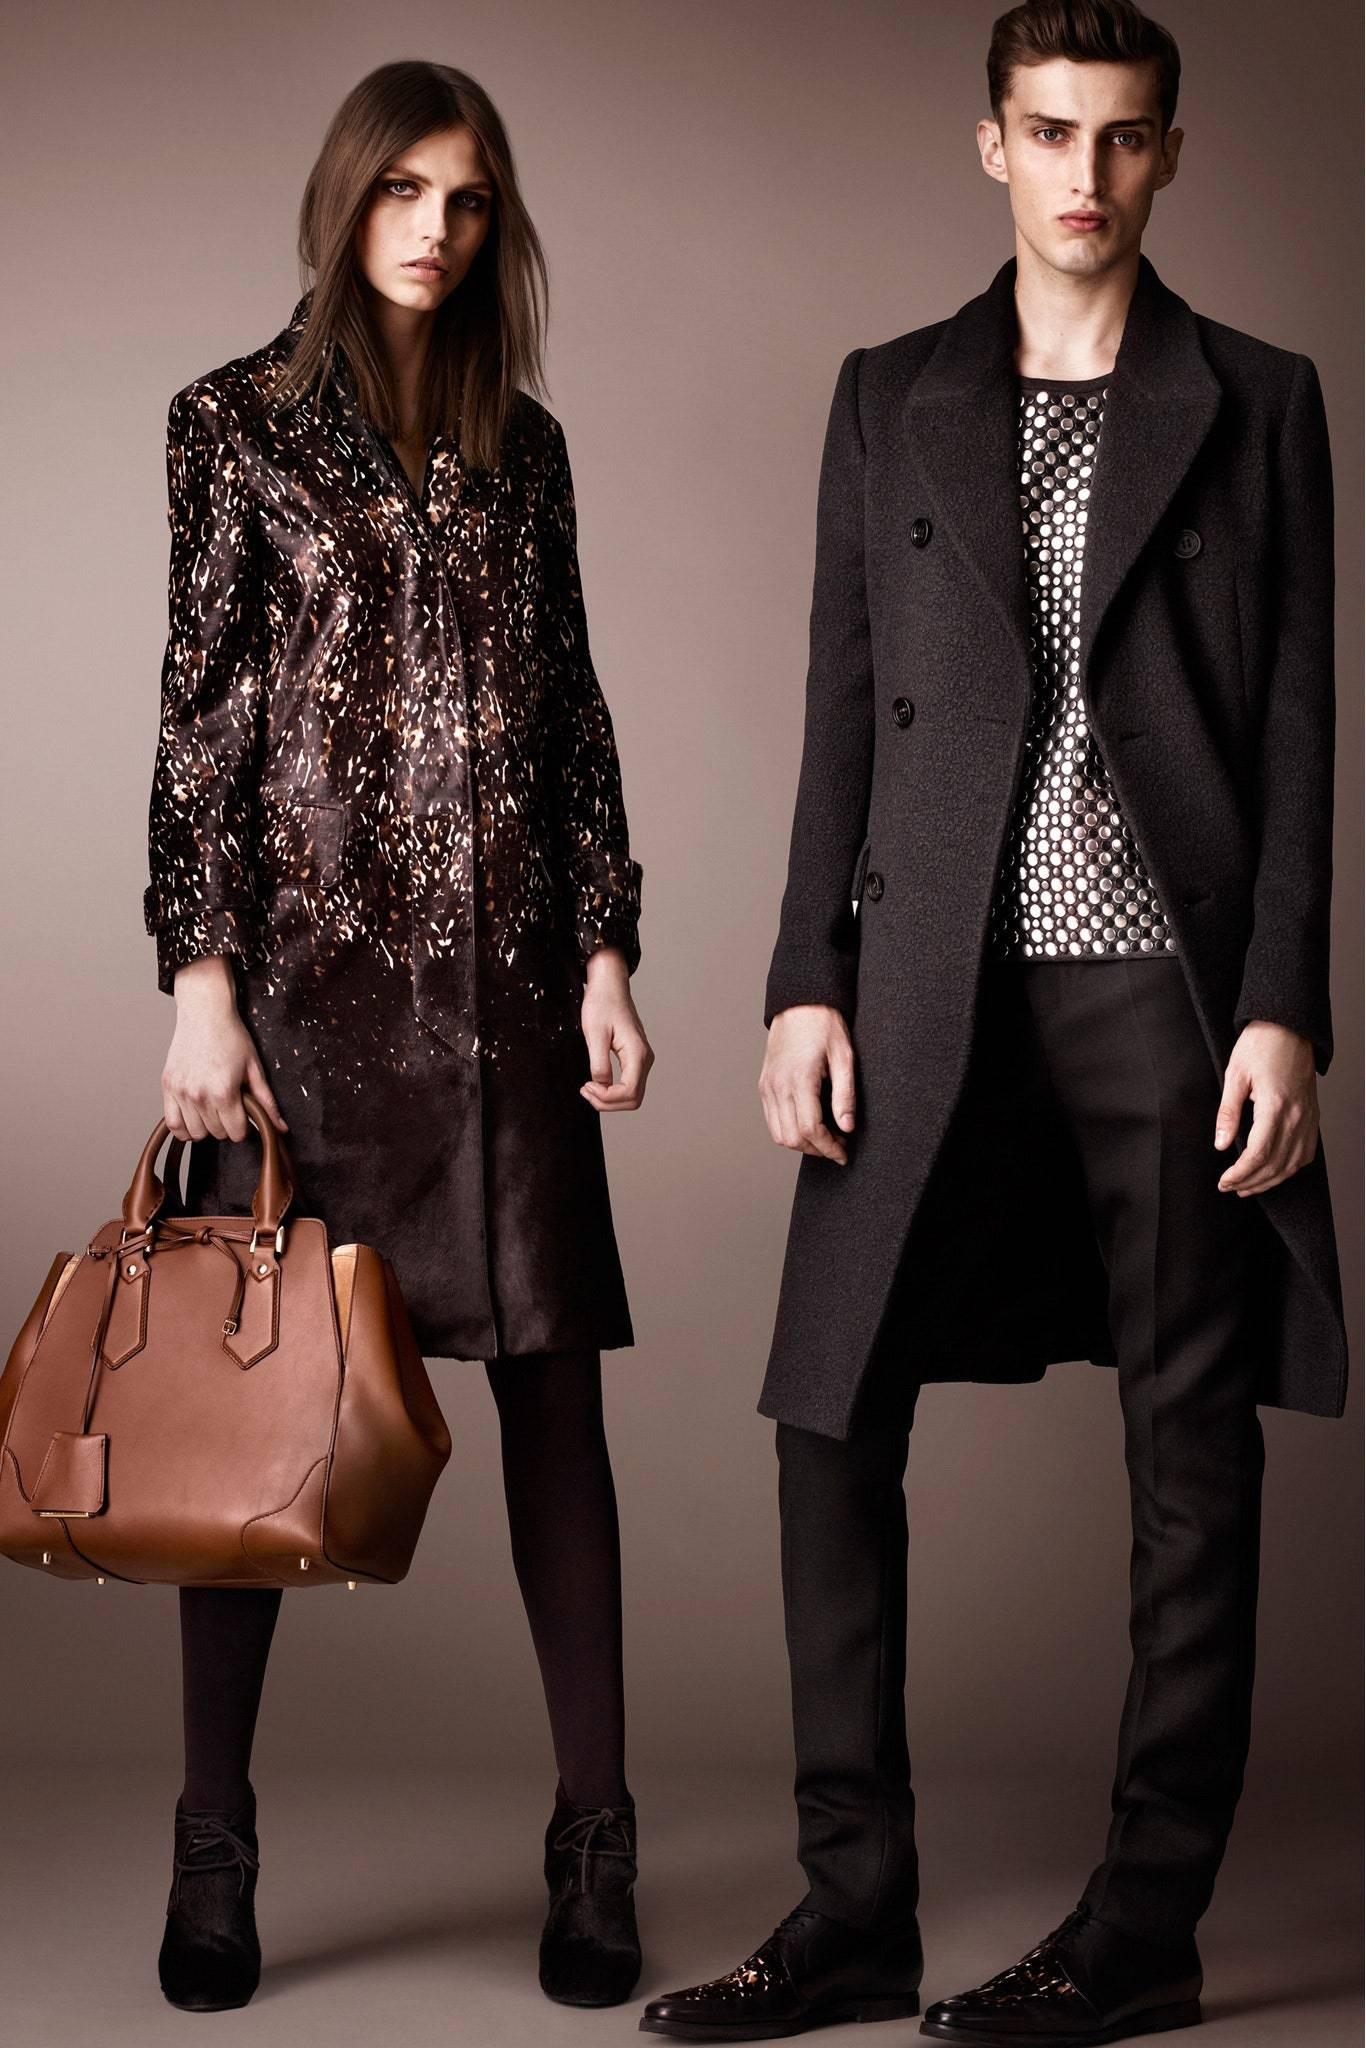 Burberry Prorsum luxurious coat from Christopher Bailey's Pre-Fall 2013 collection. Orginally retailing at $9000.
 Dark chocolate brown. Featuring 100% Calf Leather, Fully Lined. The coat features long sleeves, belted cuff, two front pockets at hip,